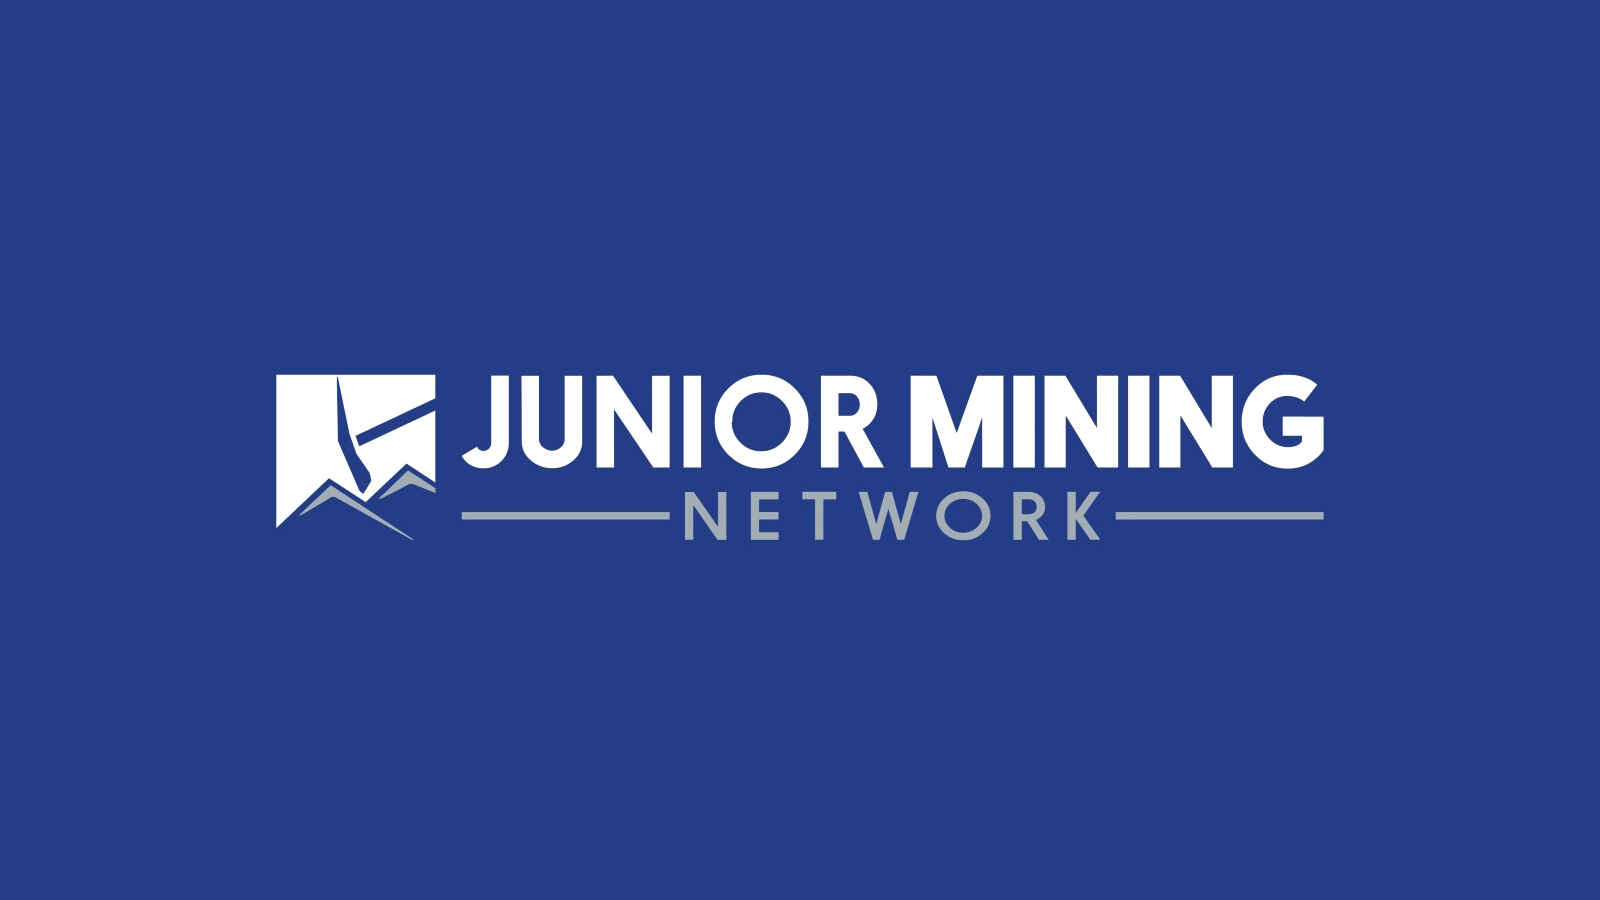 Gold Mountain Provides Corporate Update and Guidance for H2 2021